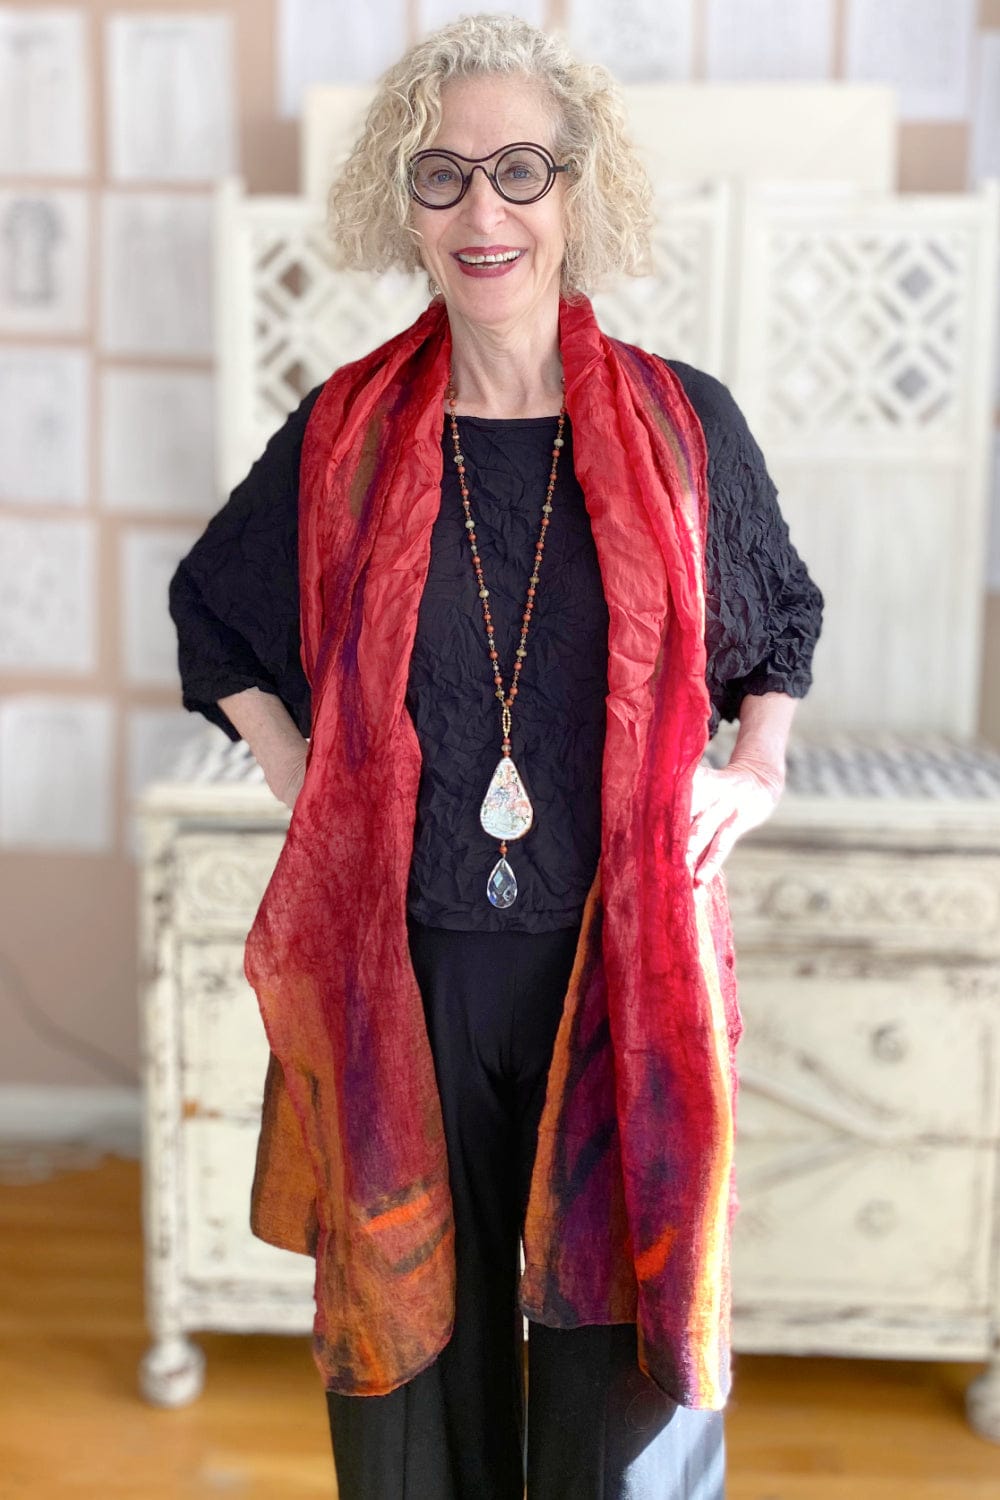 Red felt and silk scarf worn over a black top and pants accessorized with a pendant necklace.